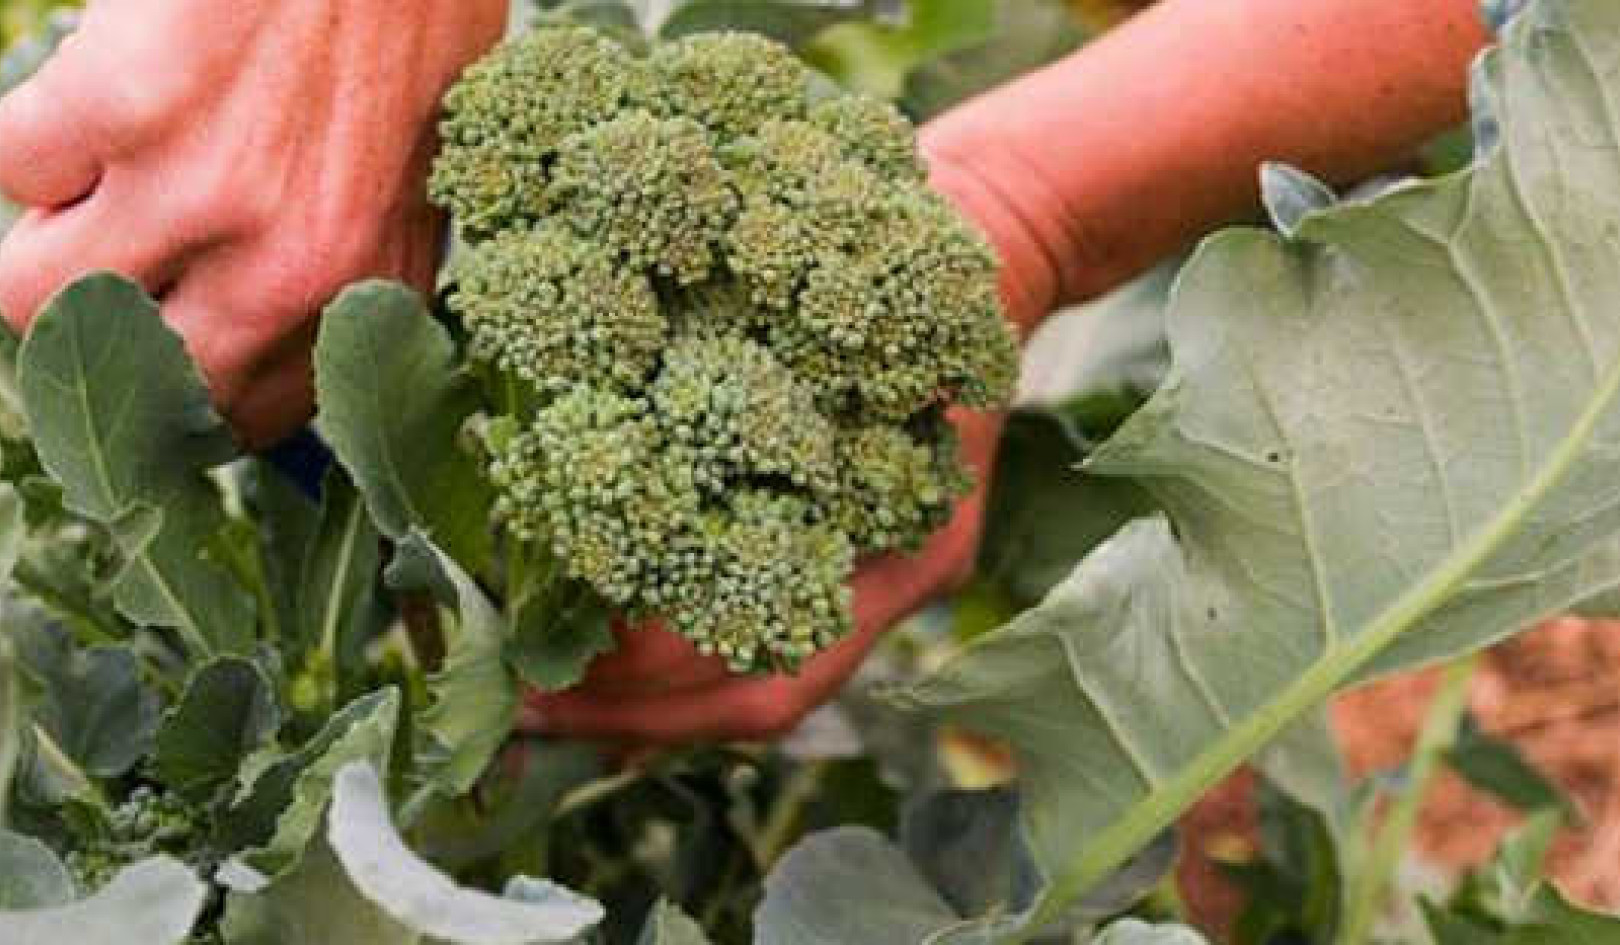 Broccoli May Help Prevent Colds And Virus Infections